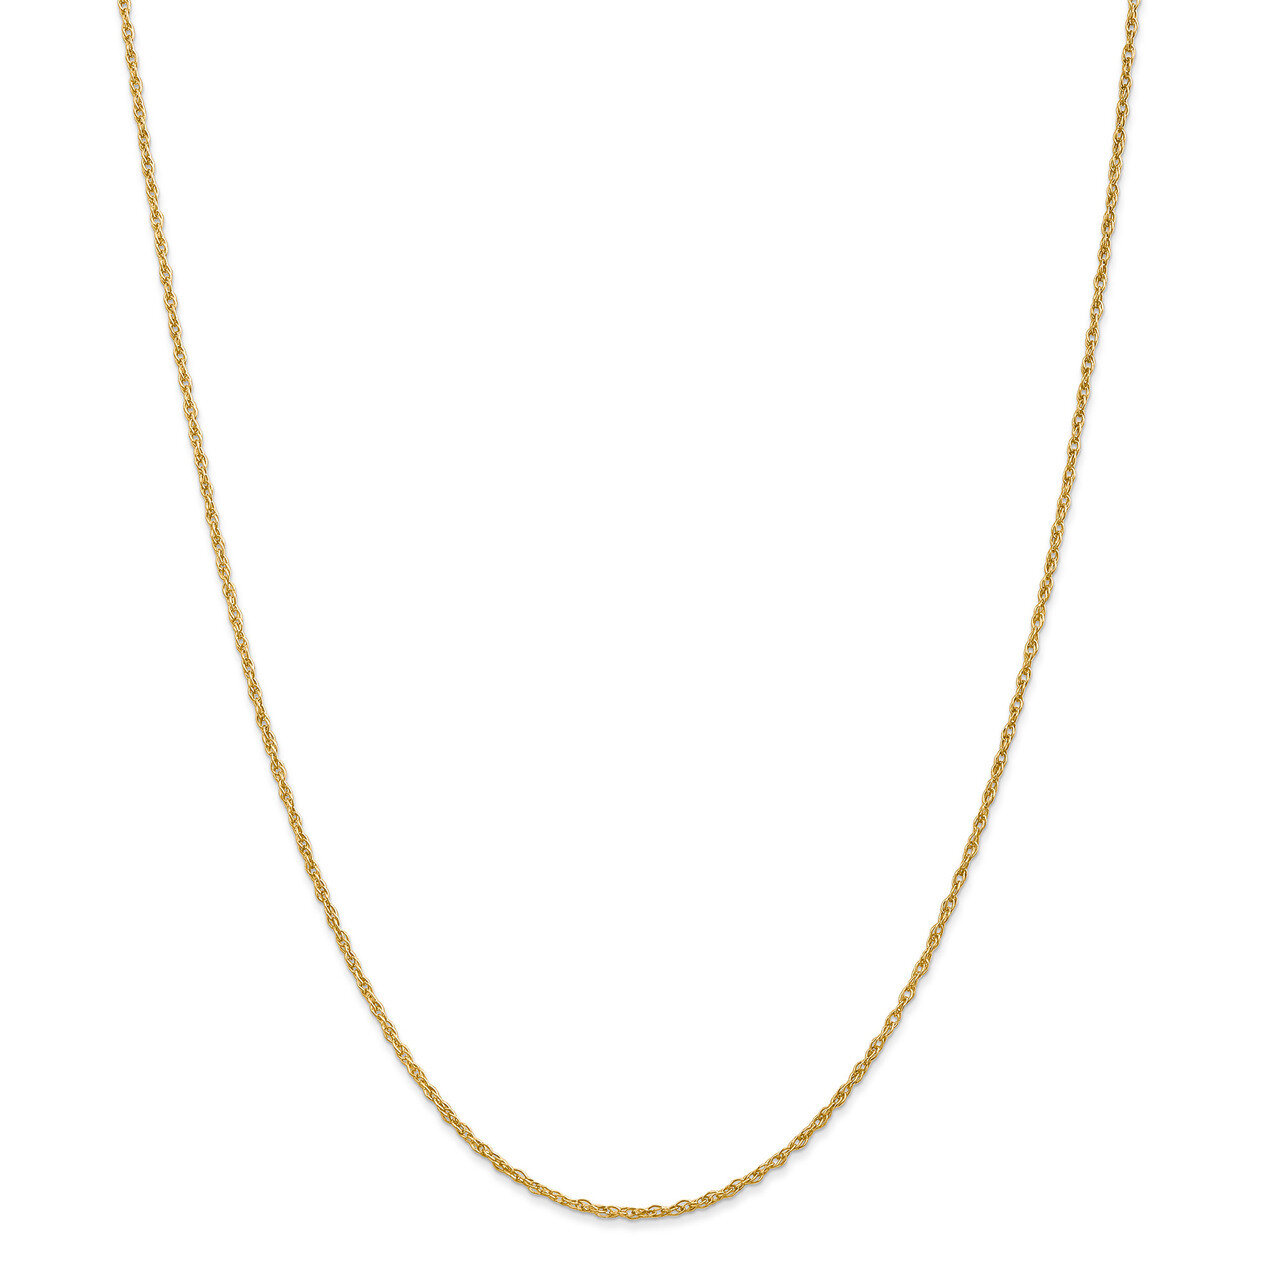 1.5 mm Pendant Rope Chain 24 Inch 14k Gold HB-7156-24